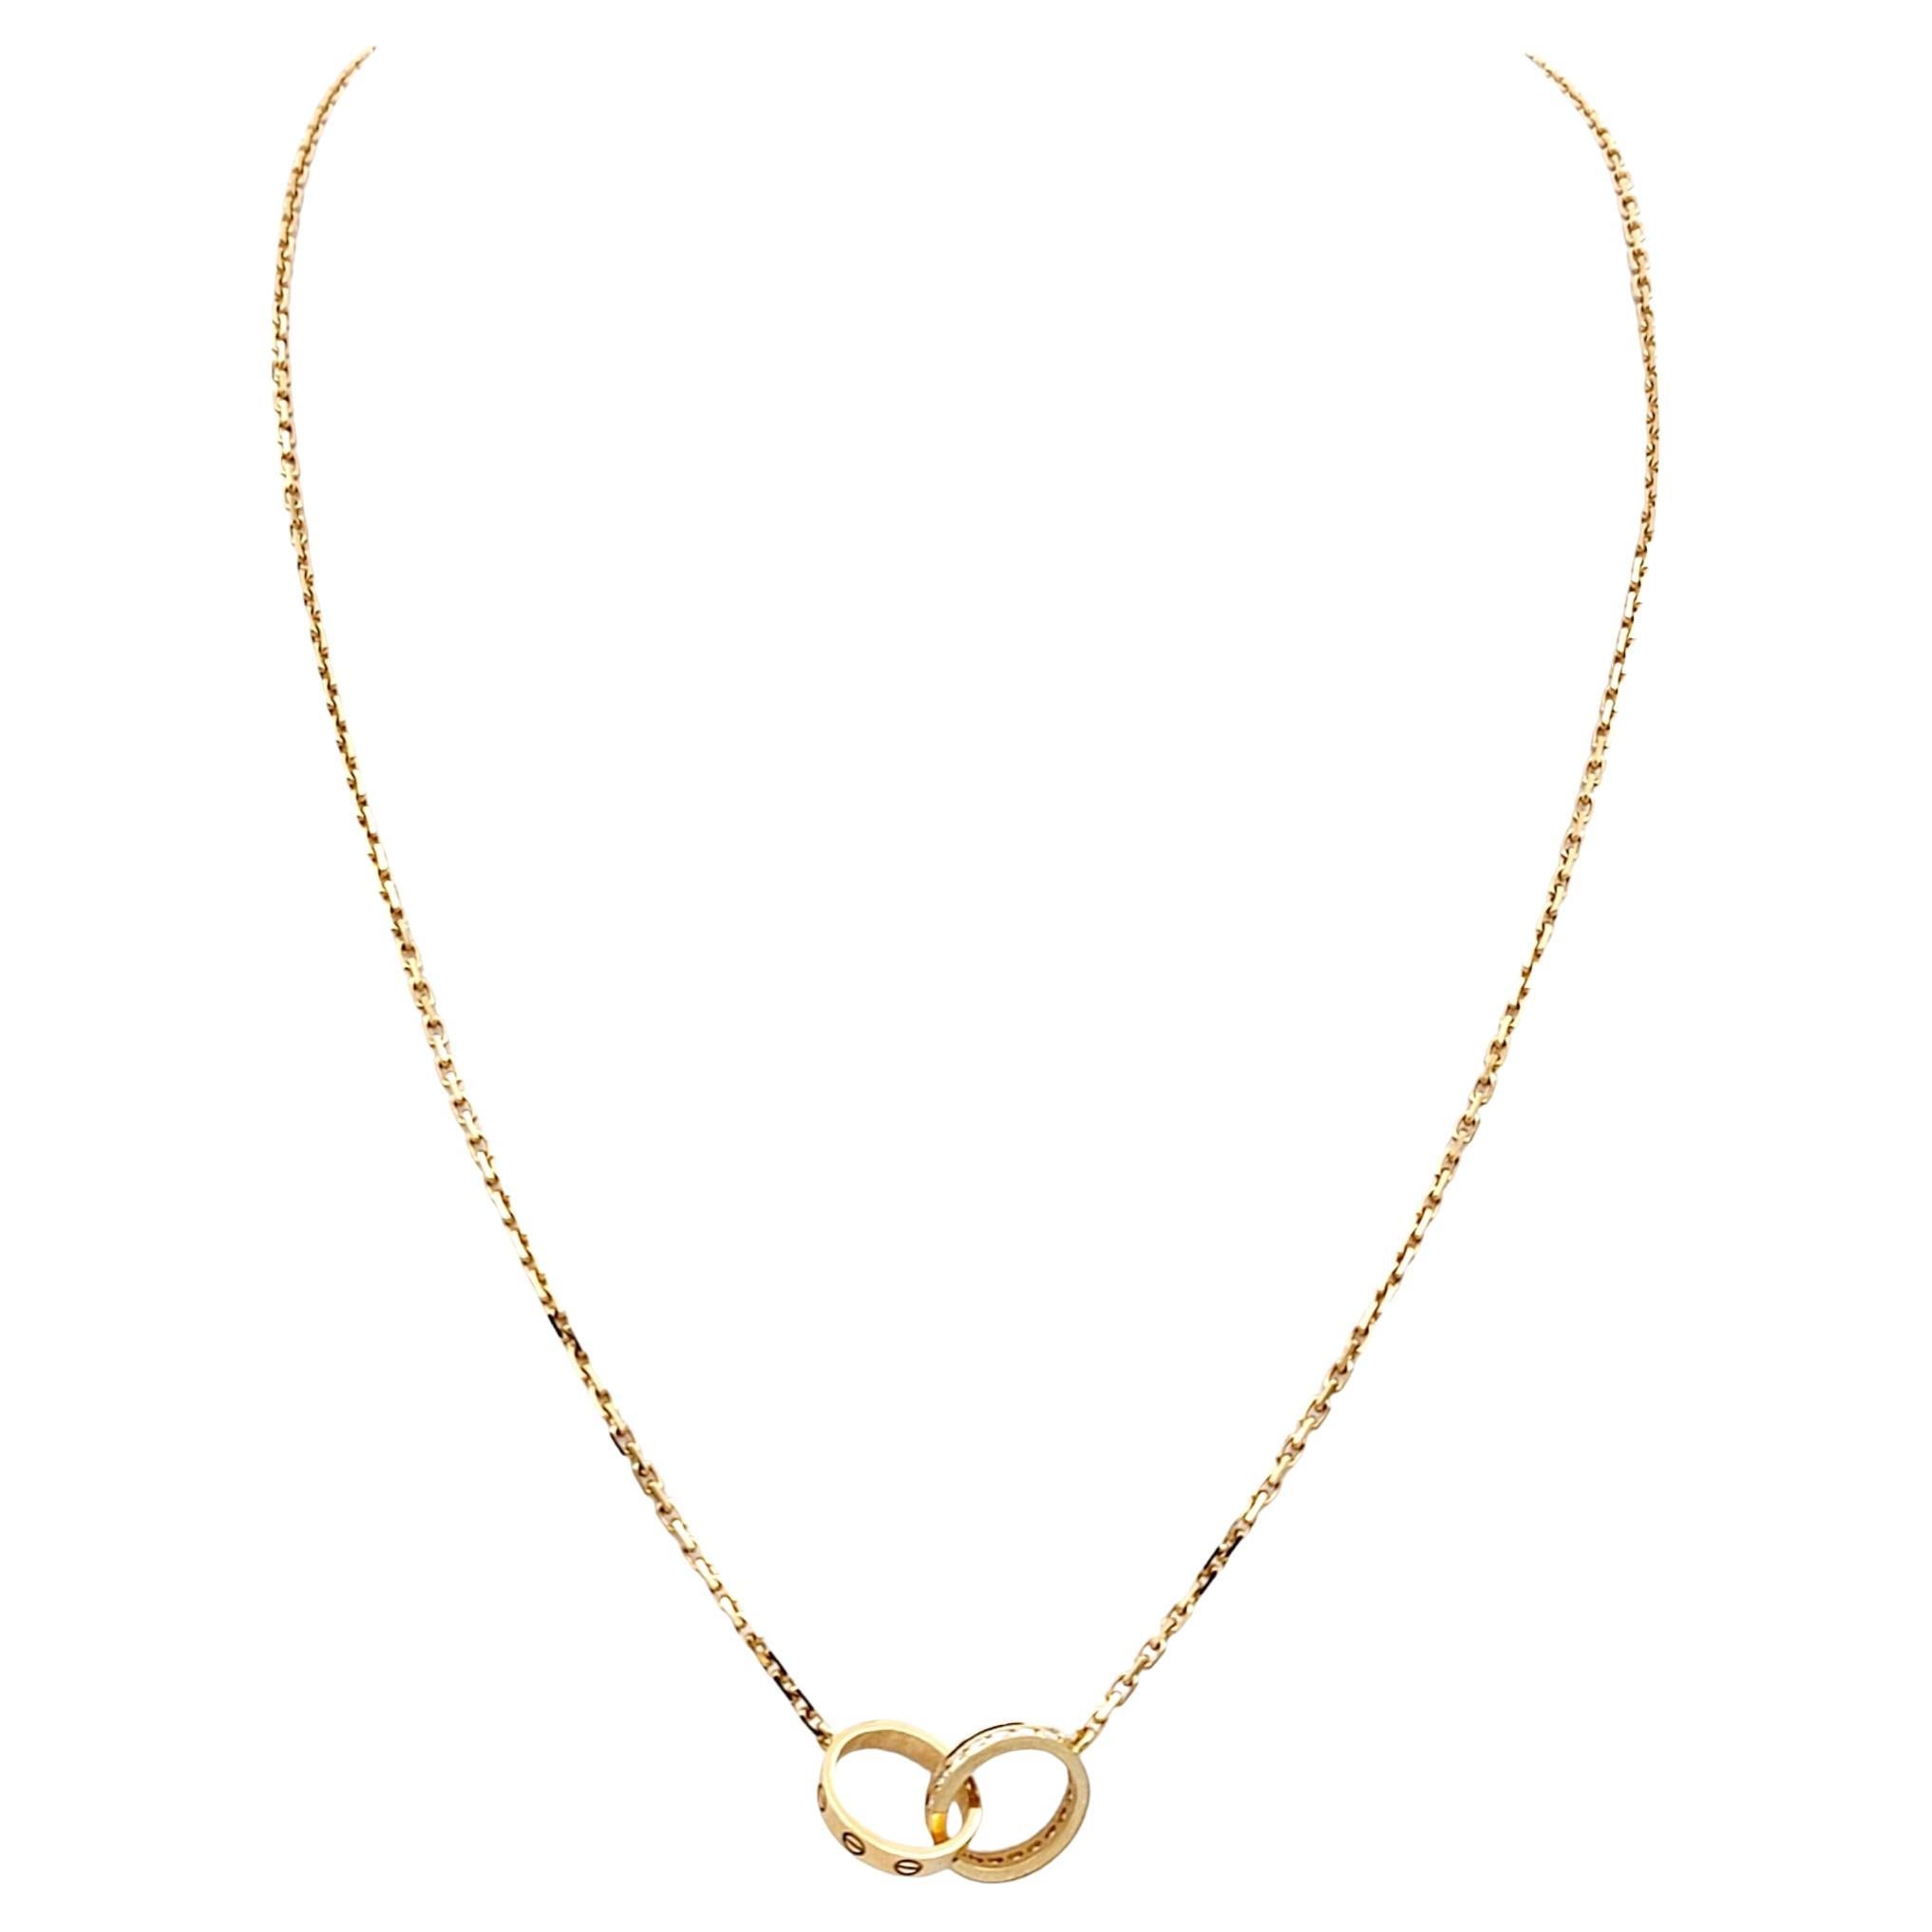 This Cartier LOVE Collection pendant necklace is a masterpiece of timeless elegance and sophistication. Crafted with meticulous attention to detail, this designer necklace features two interlocking rings that symbolize enduring love and unity.

The